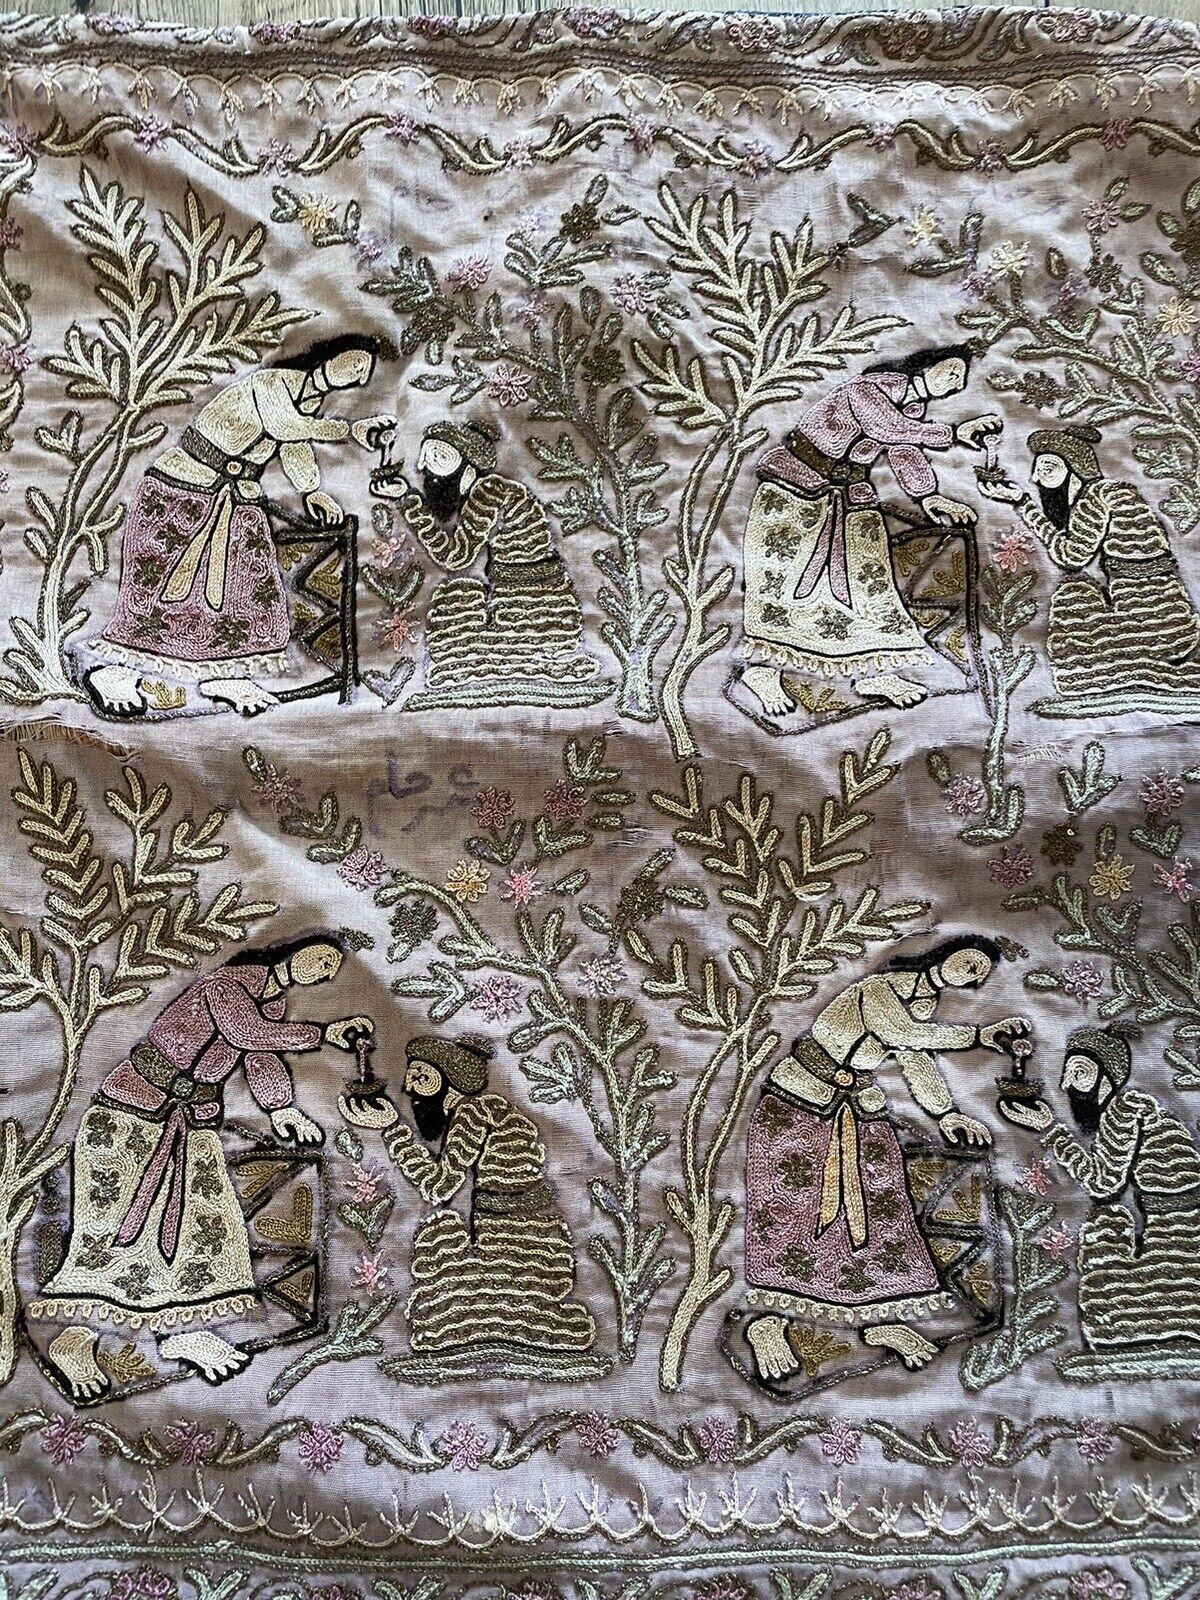 Handmade Antique Chinese Silk Collectible Embroidery 1.2' x 1.3', 1880s - 1N19 For Sale 2